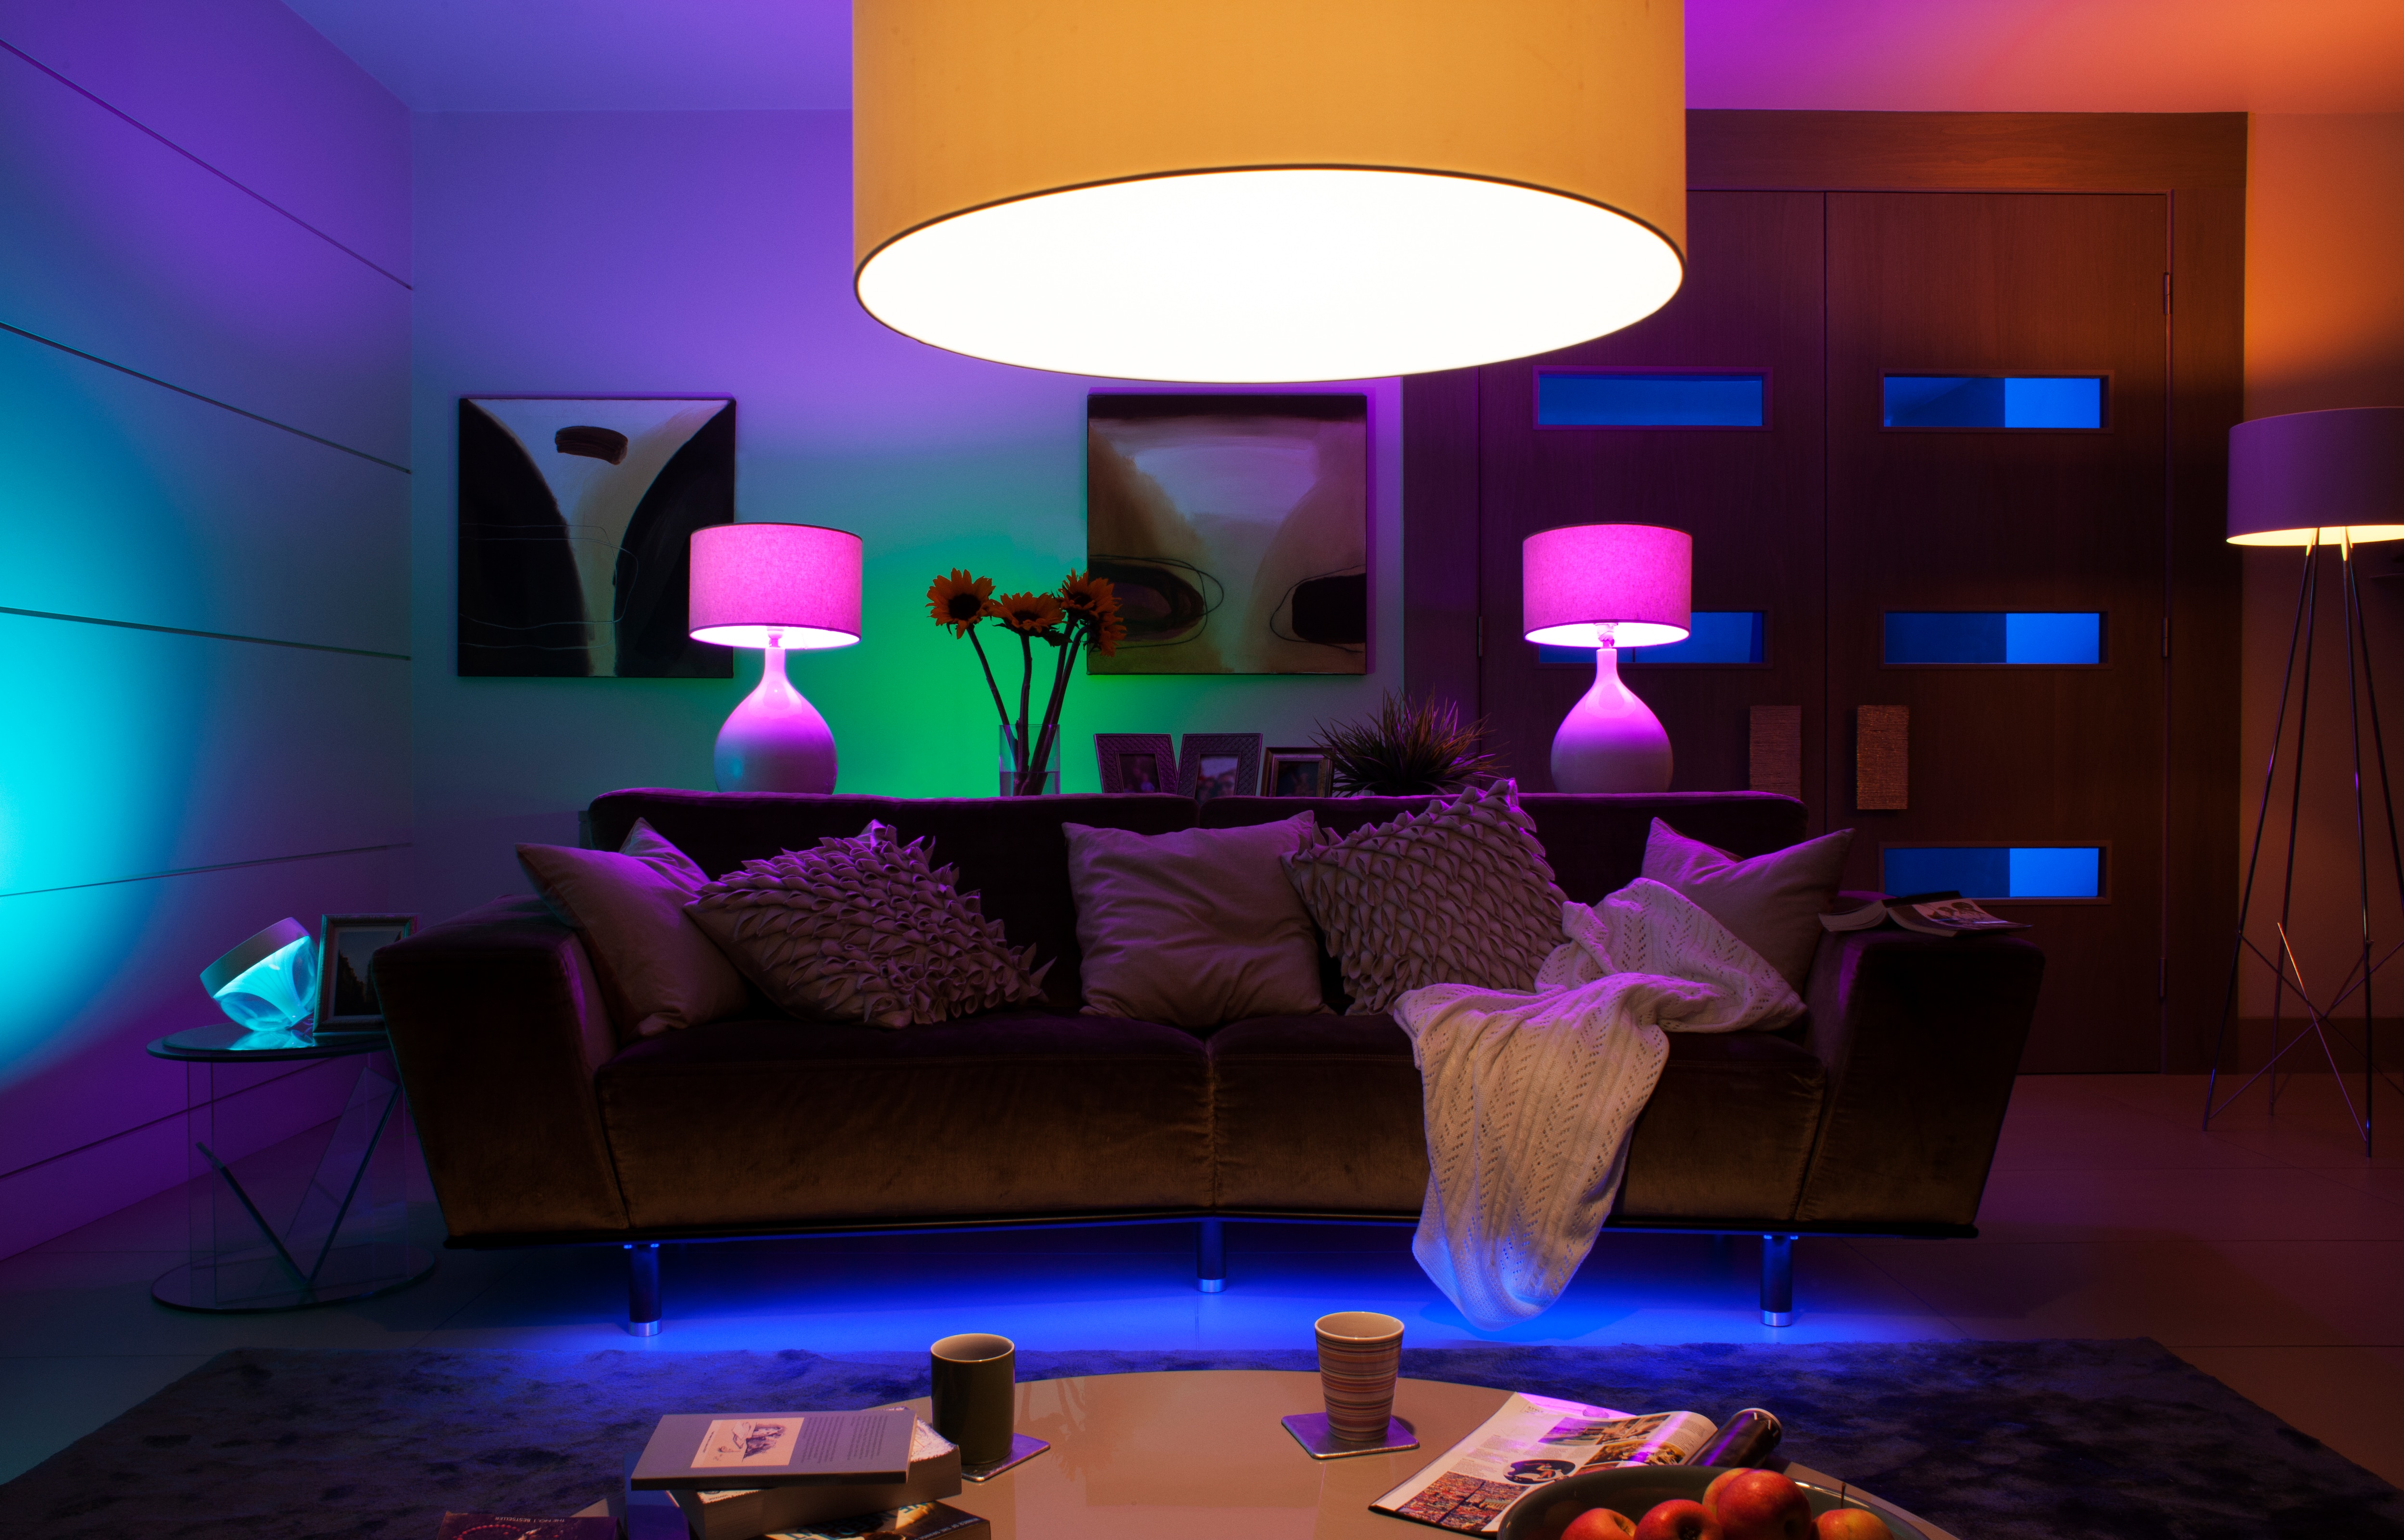 Discover for every move mood with Hue